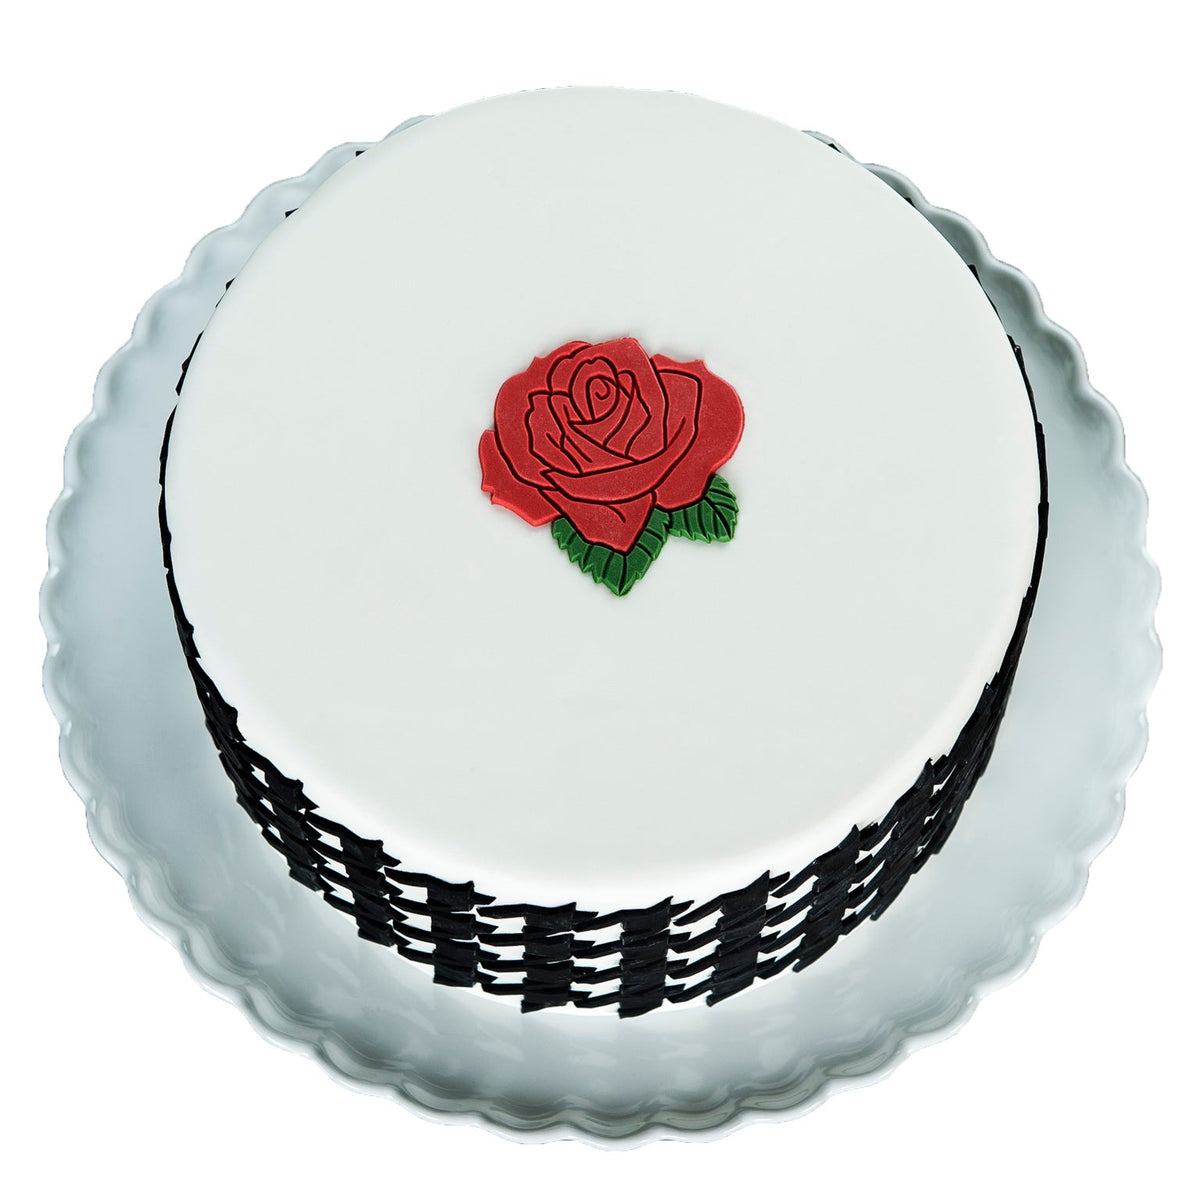 Decorated Cake Image showing the Rose Silicone Onlay for Fondant Cake Decorating by Marvelous Molds